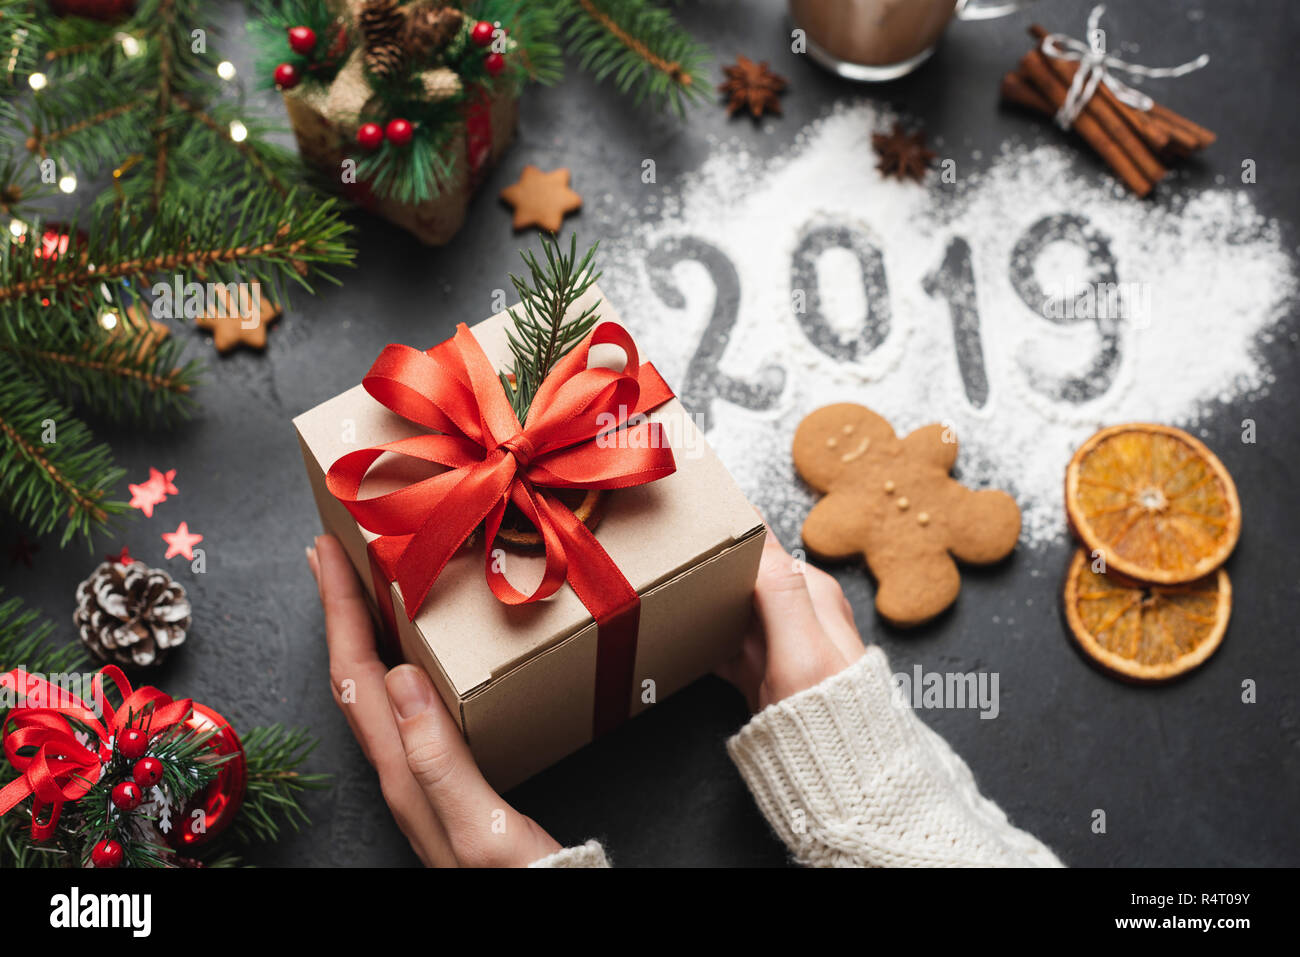 2019 Christmas New Year Greeting Card Gift Box. Hands Holding Gift Box. 2019 Number Written On Flour Stock Photo